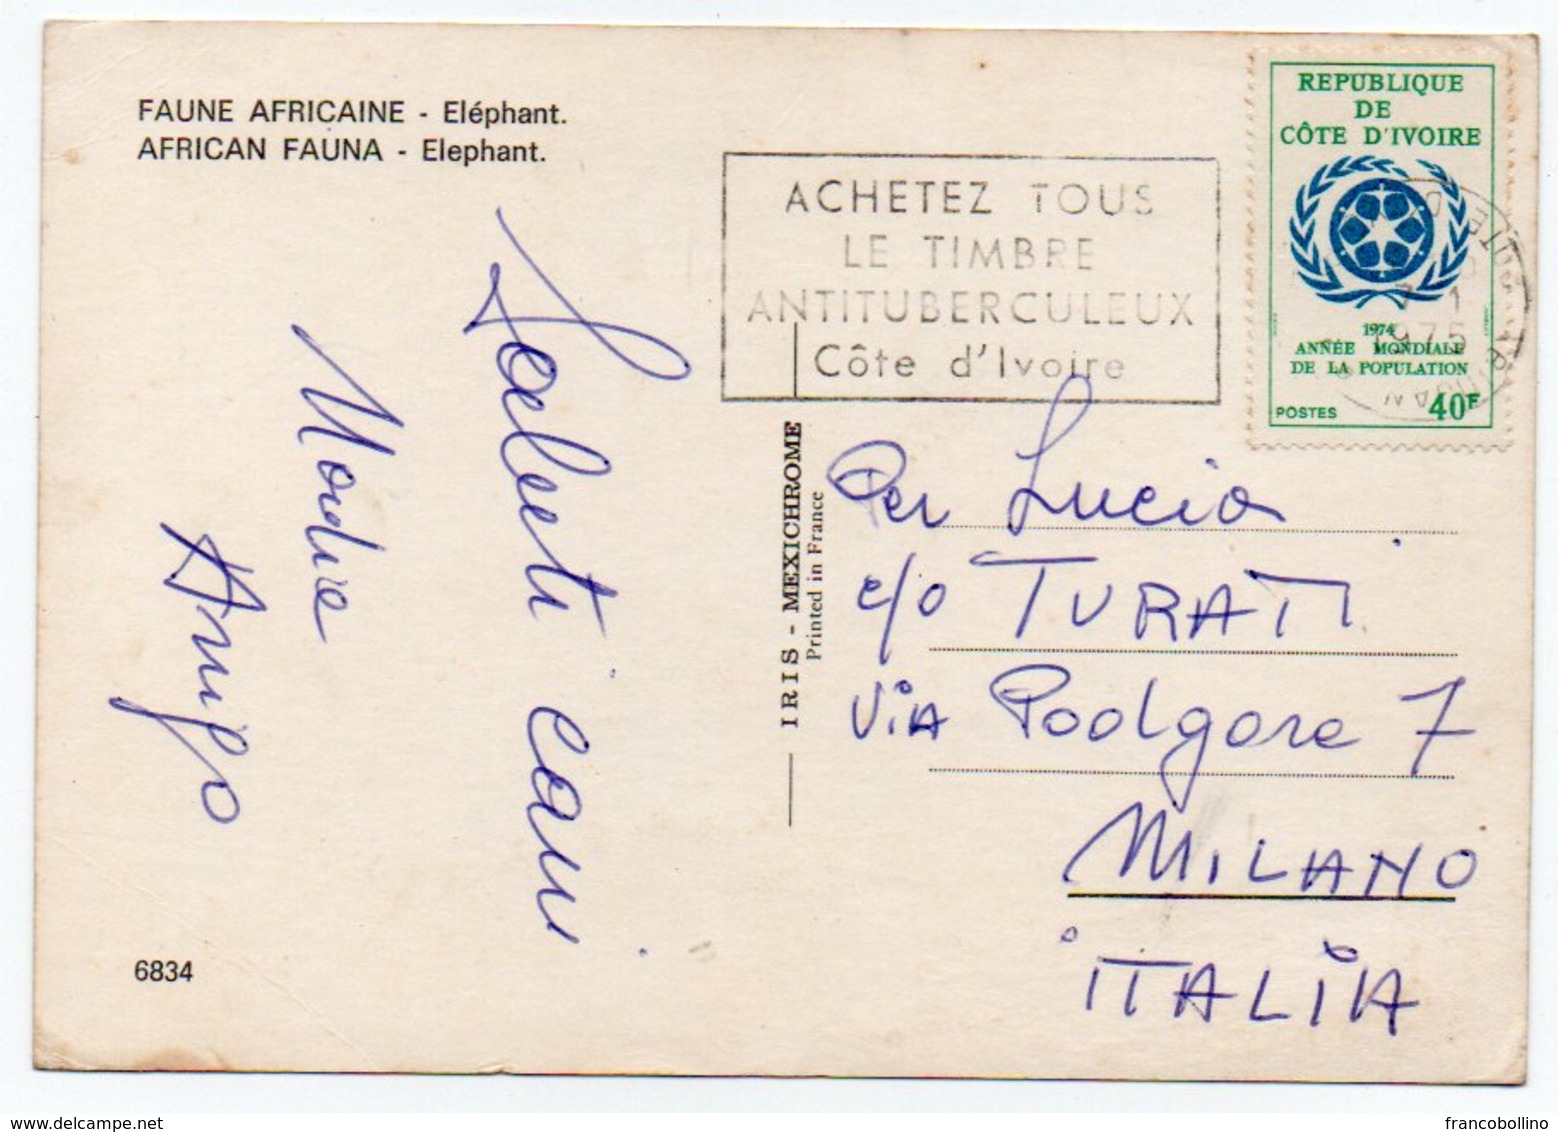 FAUNE AFRICAINE - ELEPHANT / THEMATIC STAMP - Costa De Marfil